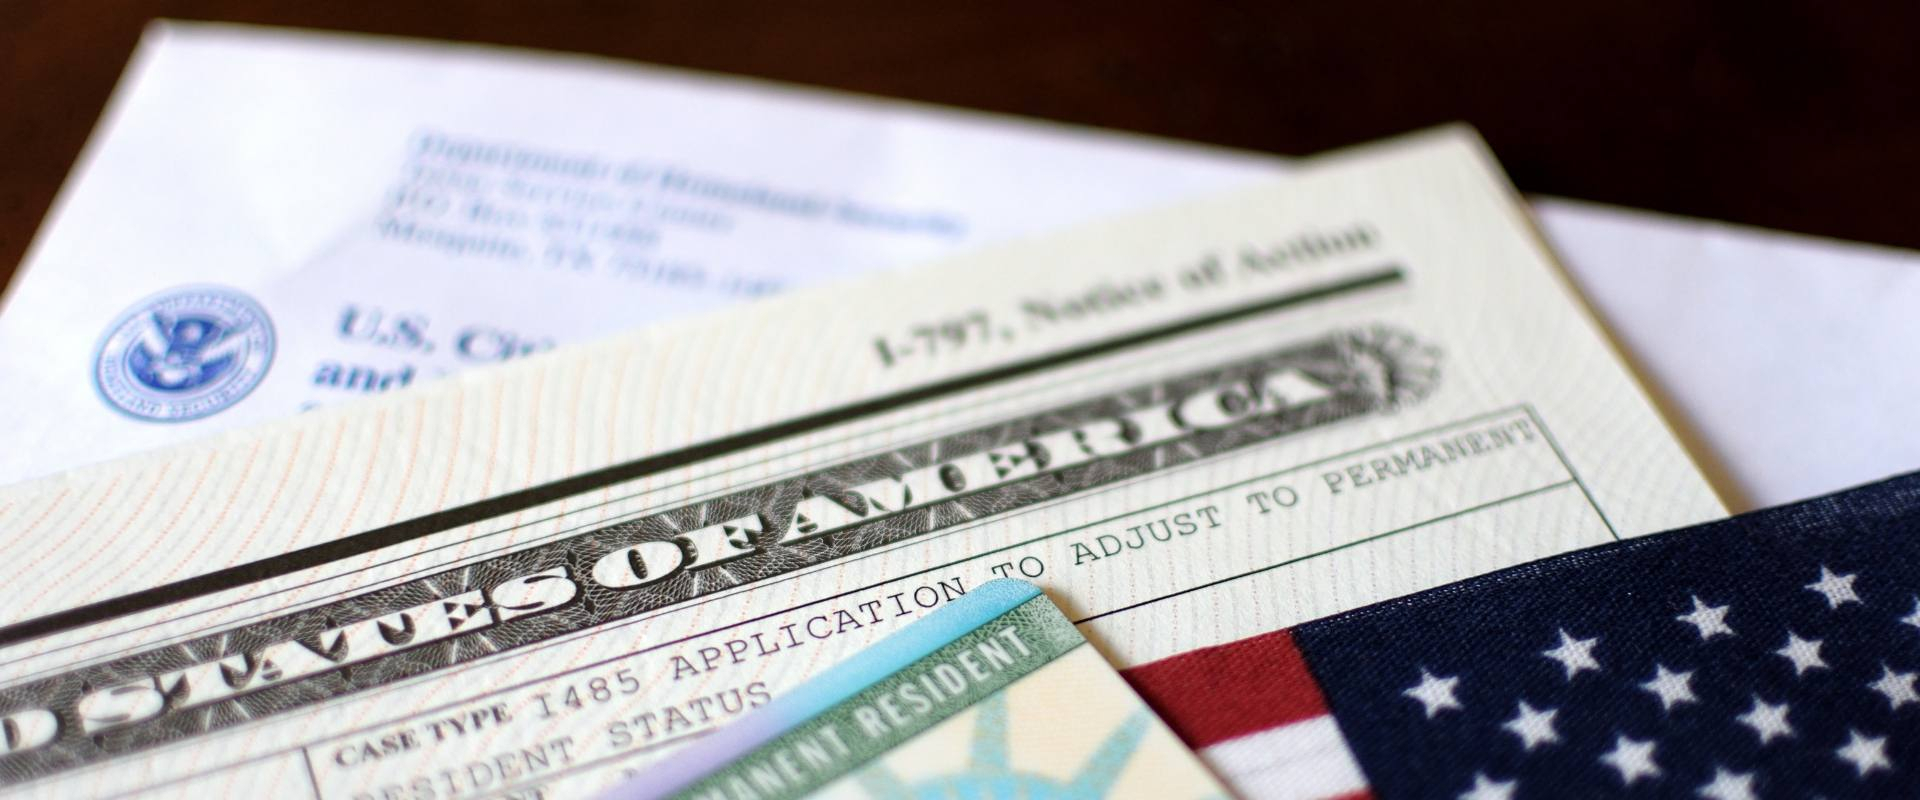 Everything You Need To Know About Form I-9 | Aps Payroll